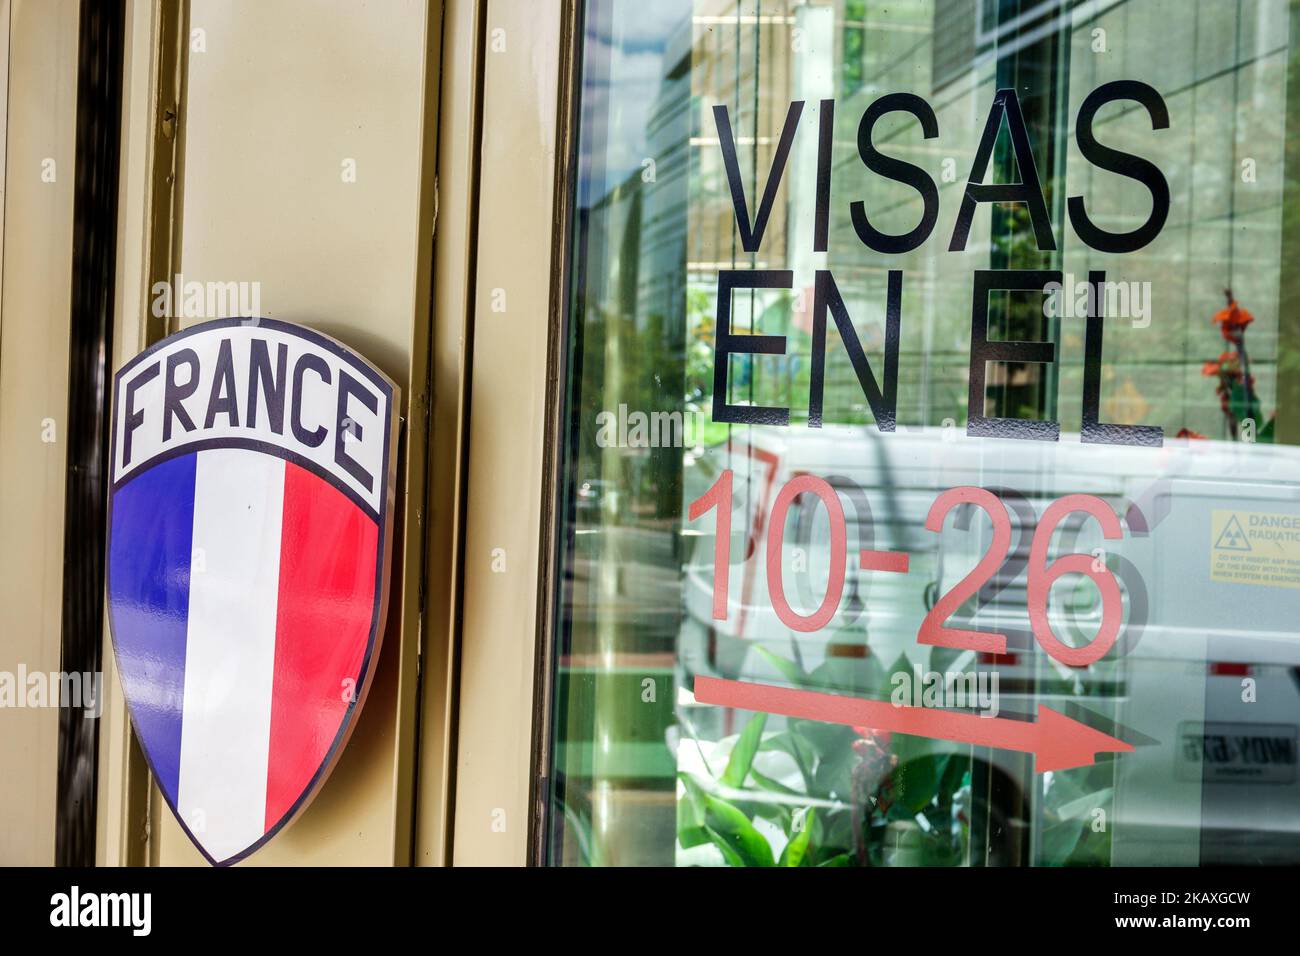 Bogota Colombia,El Chico Calle 93,French France Embassy Visa Visas request requests outside exterior front entrance,Colombian Colombians Hispanic Hisp Stock Photo